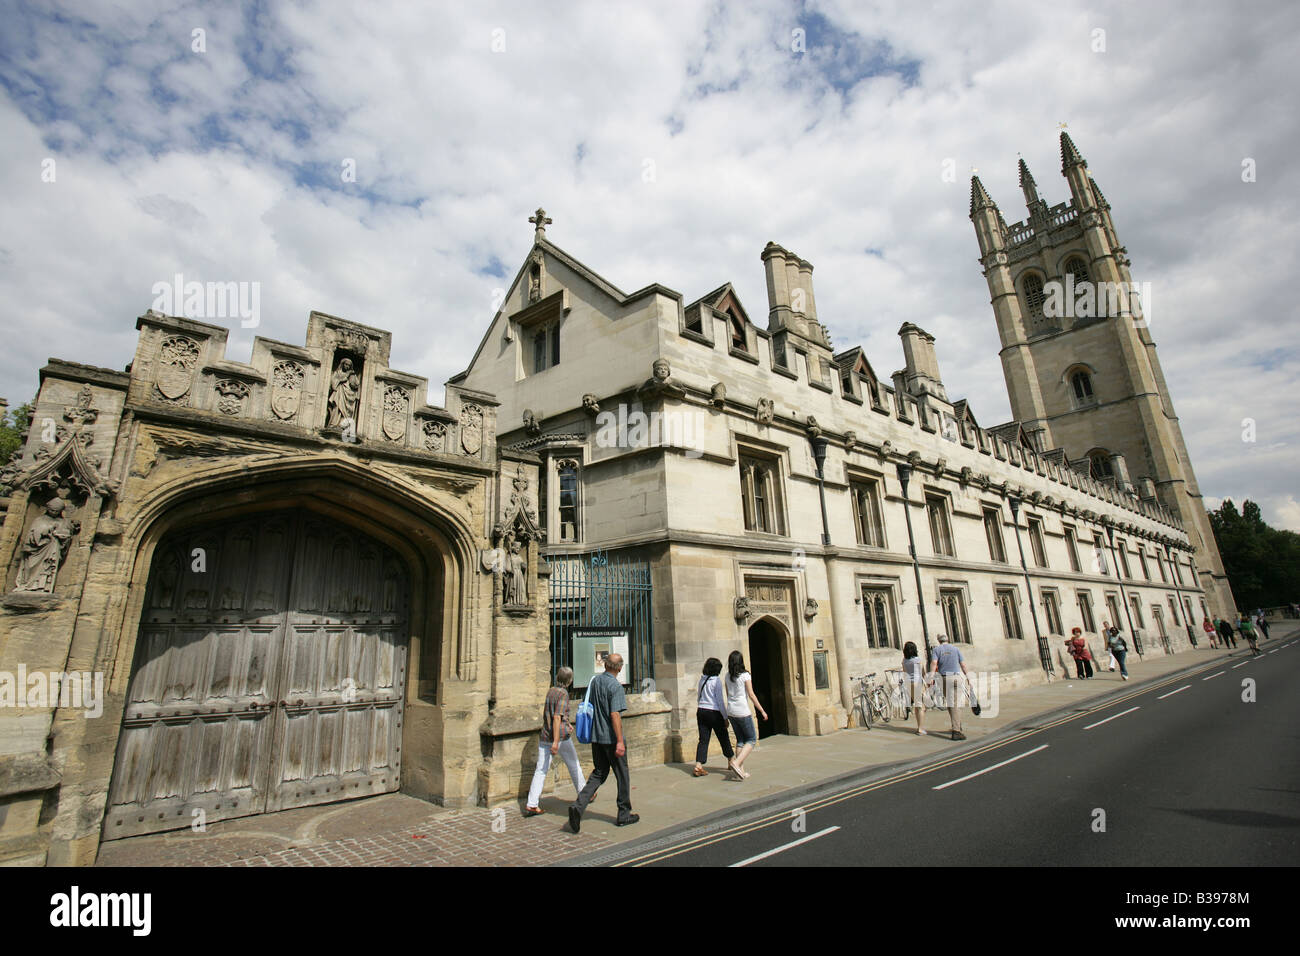 City of Oxford, England. Magdalen College viewed from Oxford’s High Street, with the Great Tower (bell tower) in the background. Stock Photo